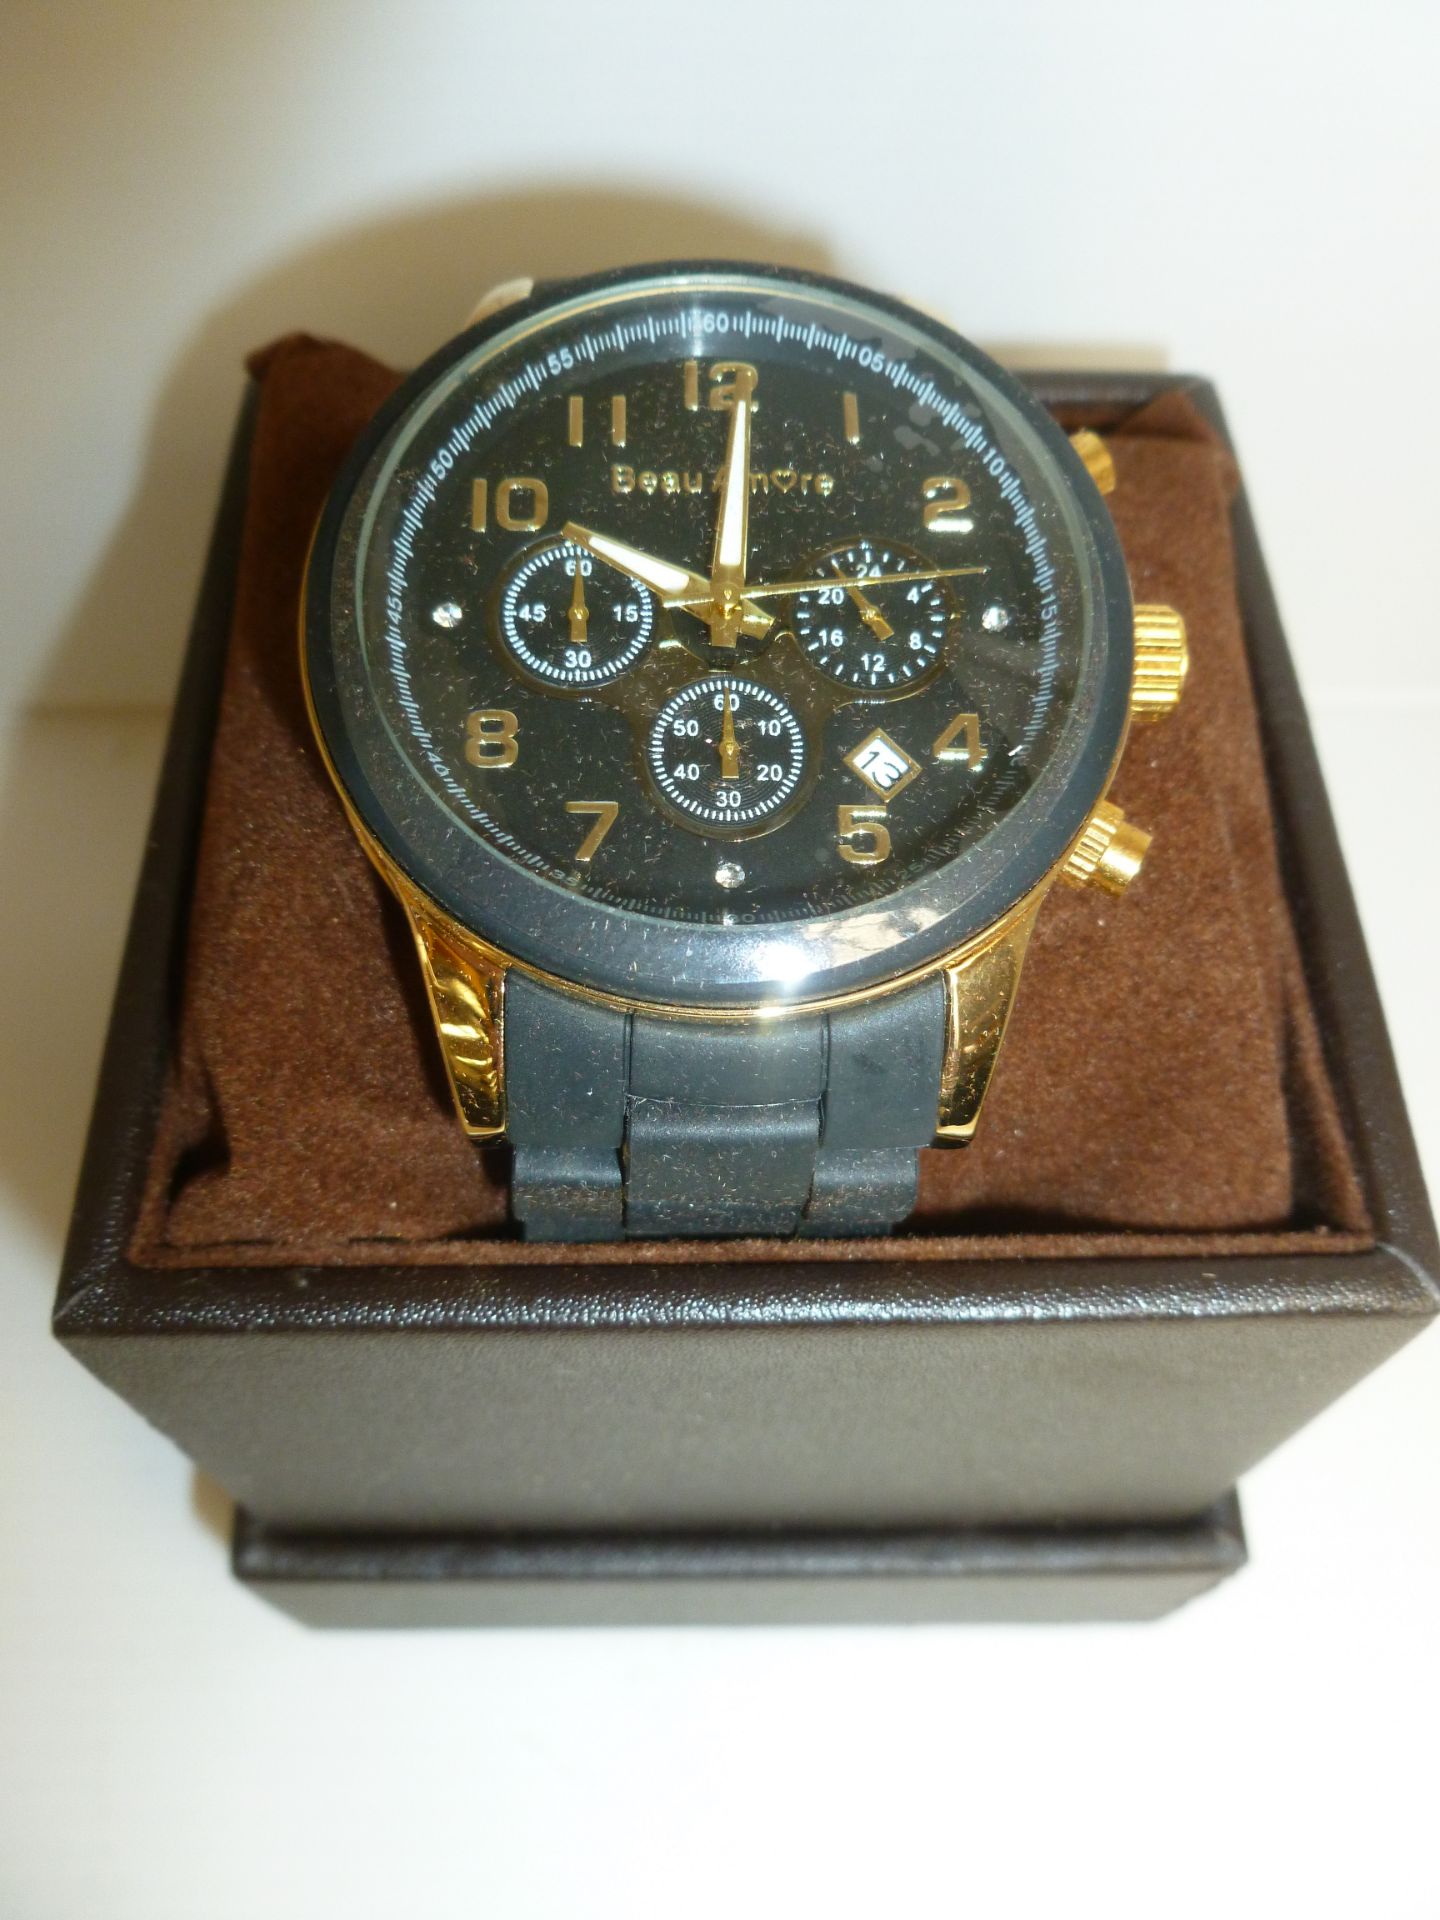 NO VAT!! Beau Amore Black and Gold coloured Watch in the style of the very popular Michael Kors